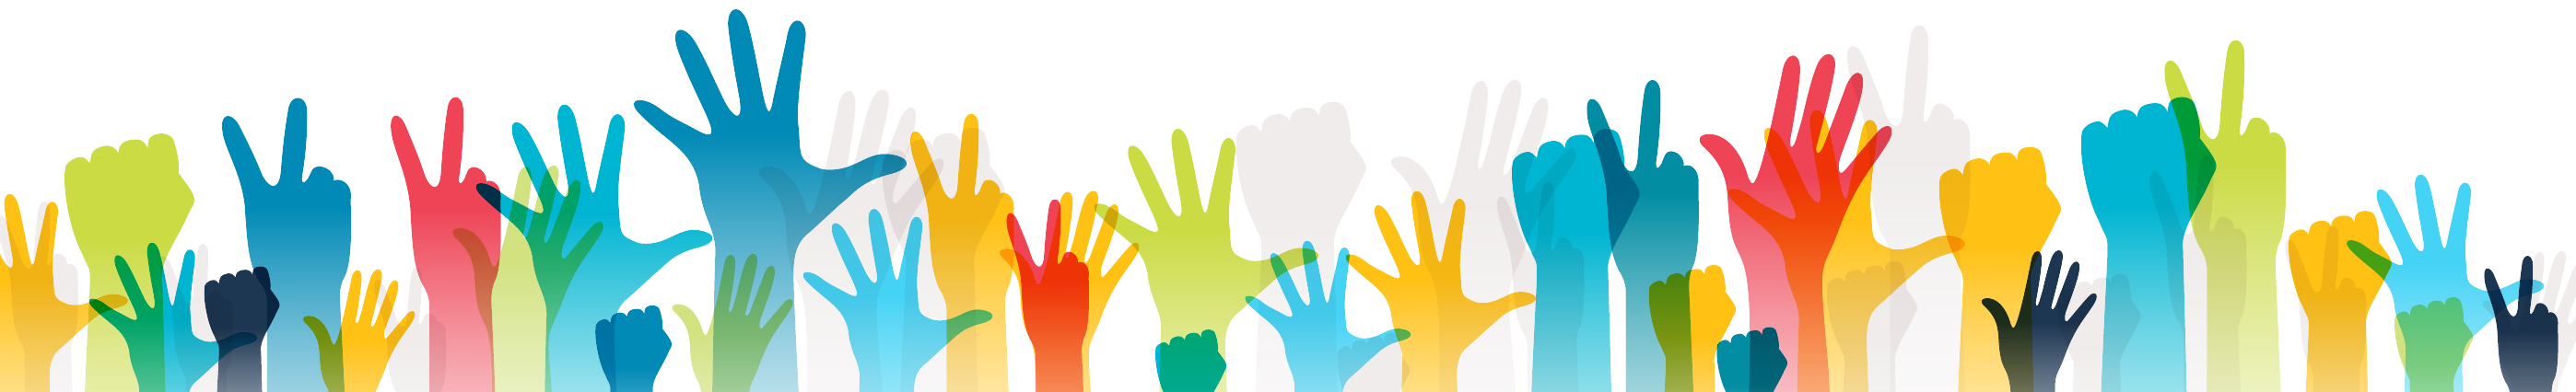 Hands up silhouettes, horizontal border. Decoration element from pink, green, yellow, and blue raised hands. Conceptual illustration for diversity and team.